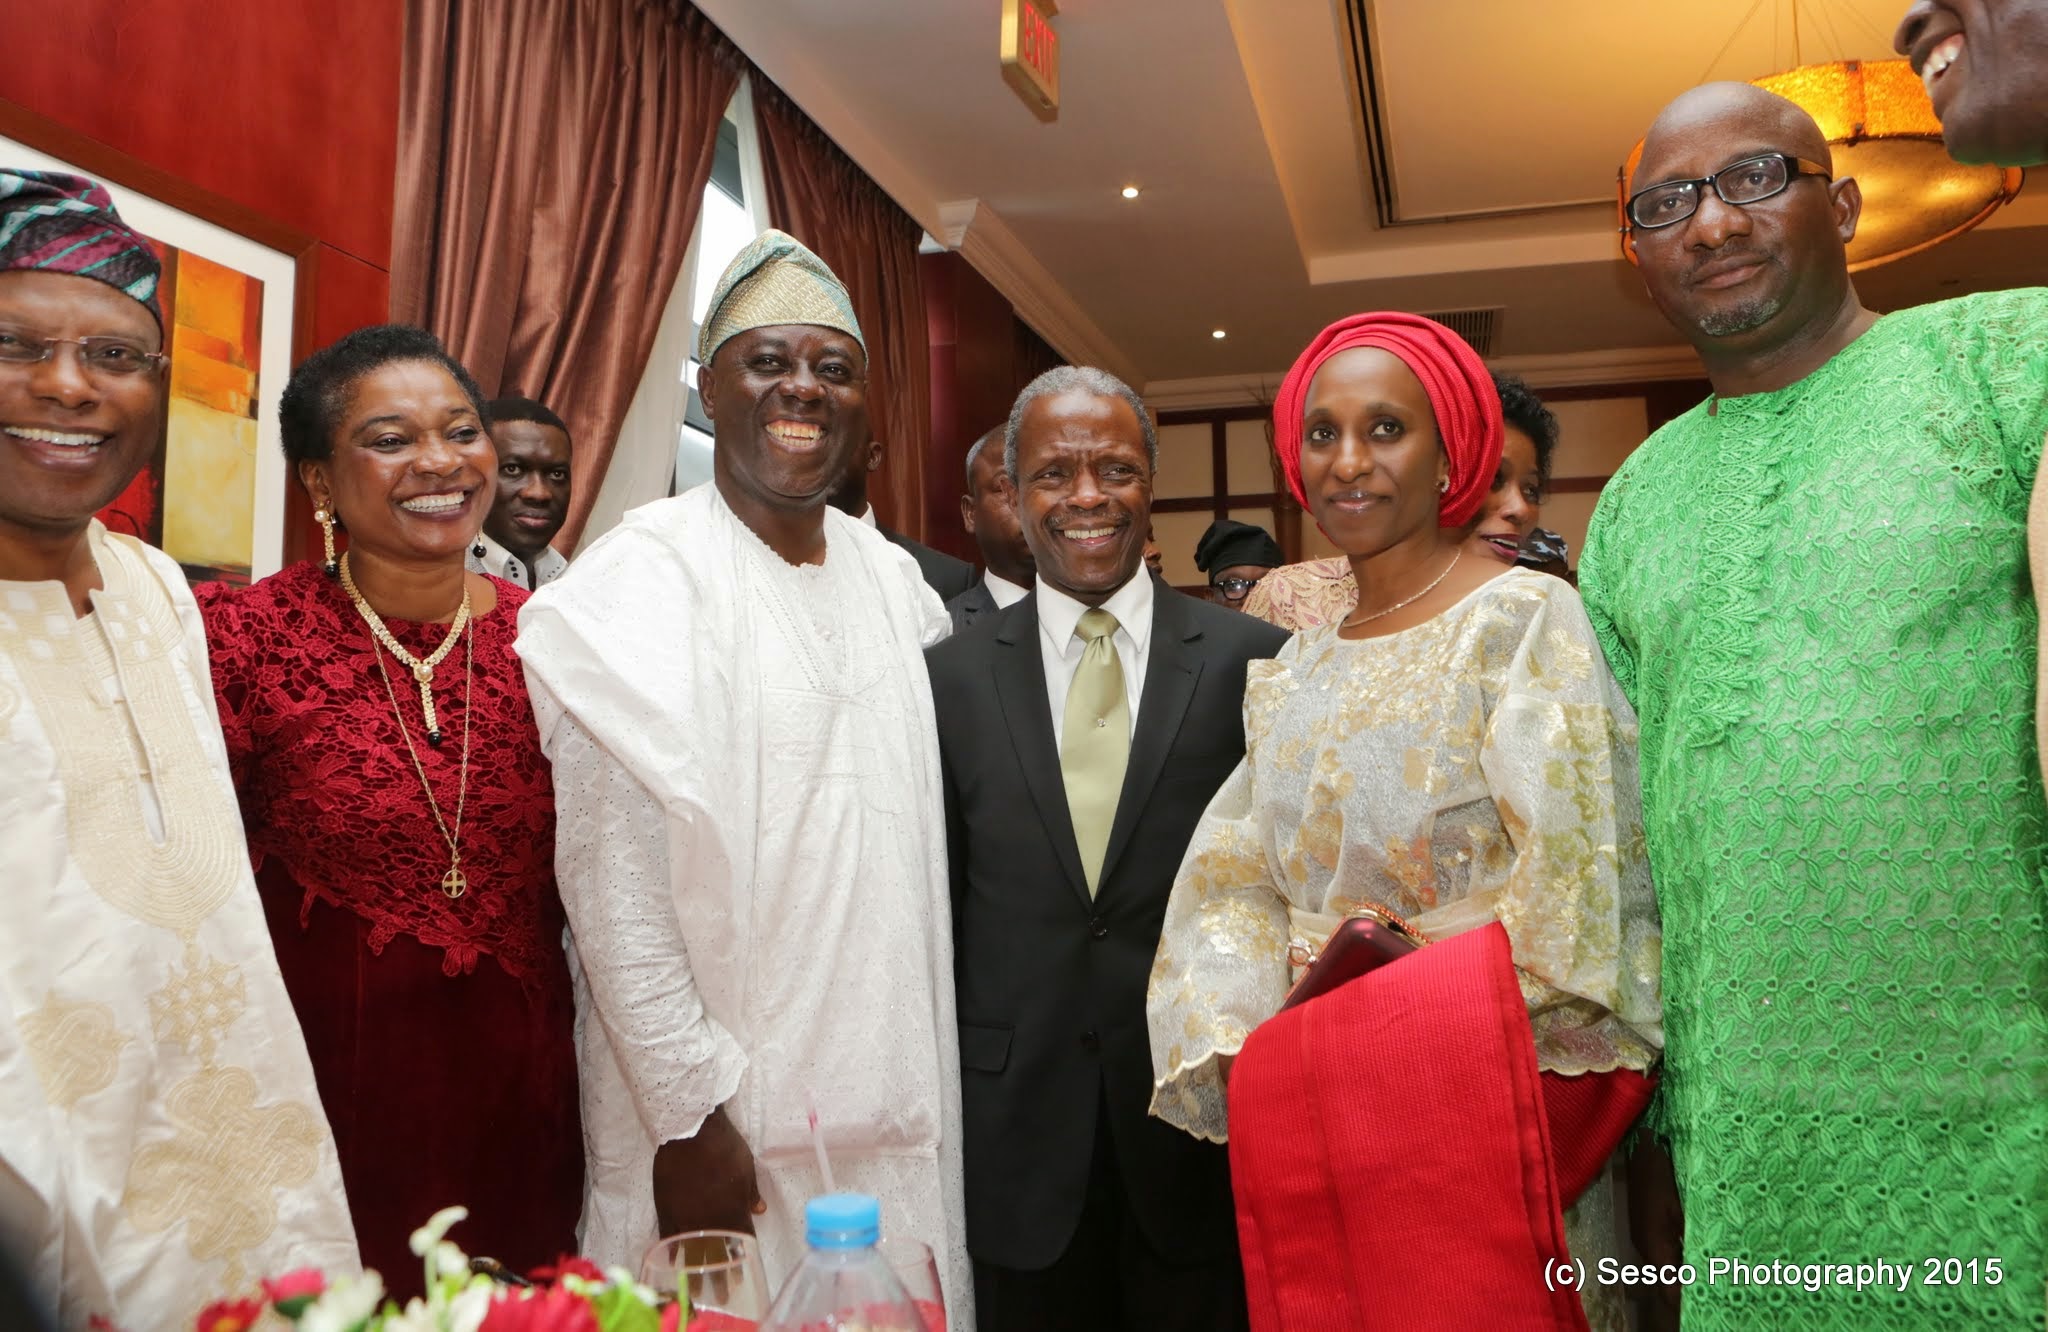 VP Osinbajo And Wife Attends Justice Bunmi Oyewole’s 50th Birthday Party On 16/05/2015